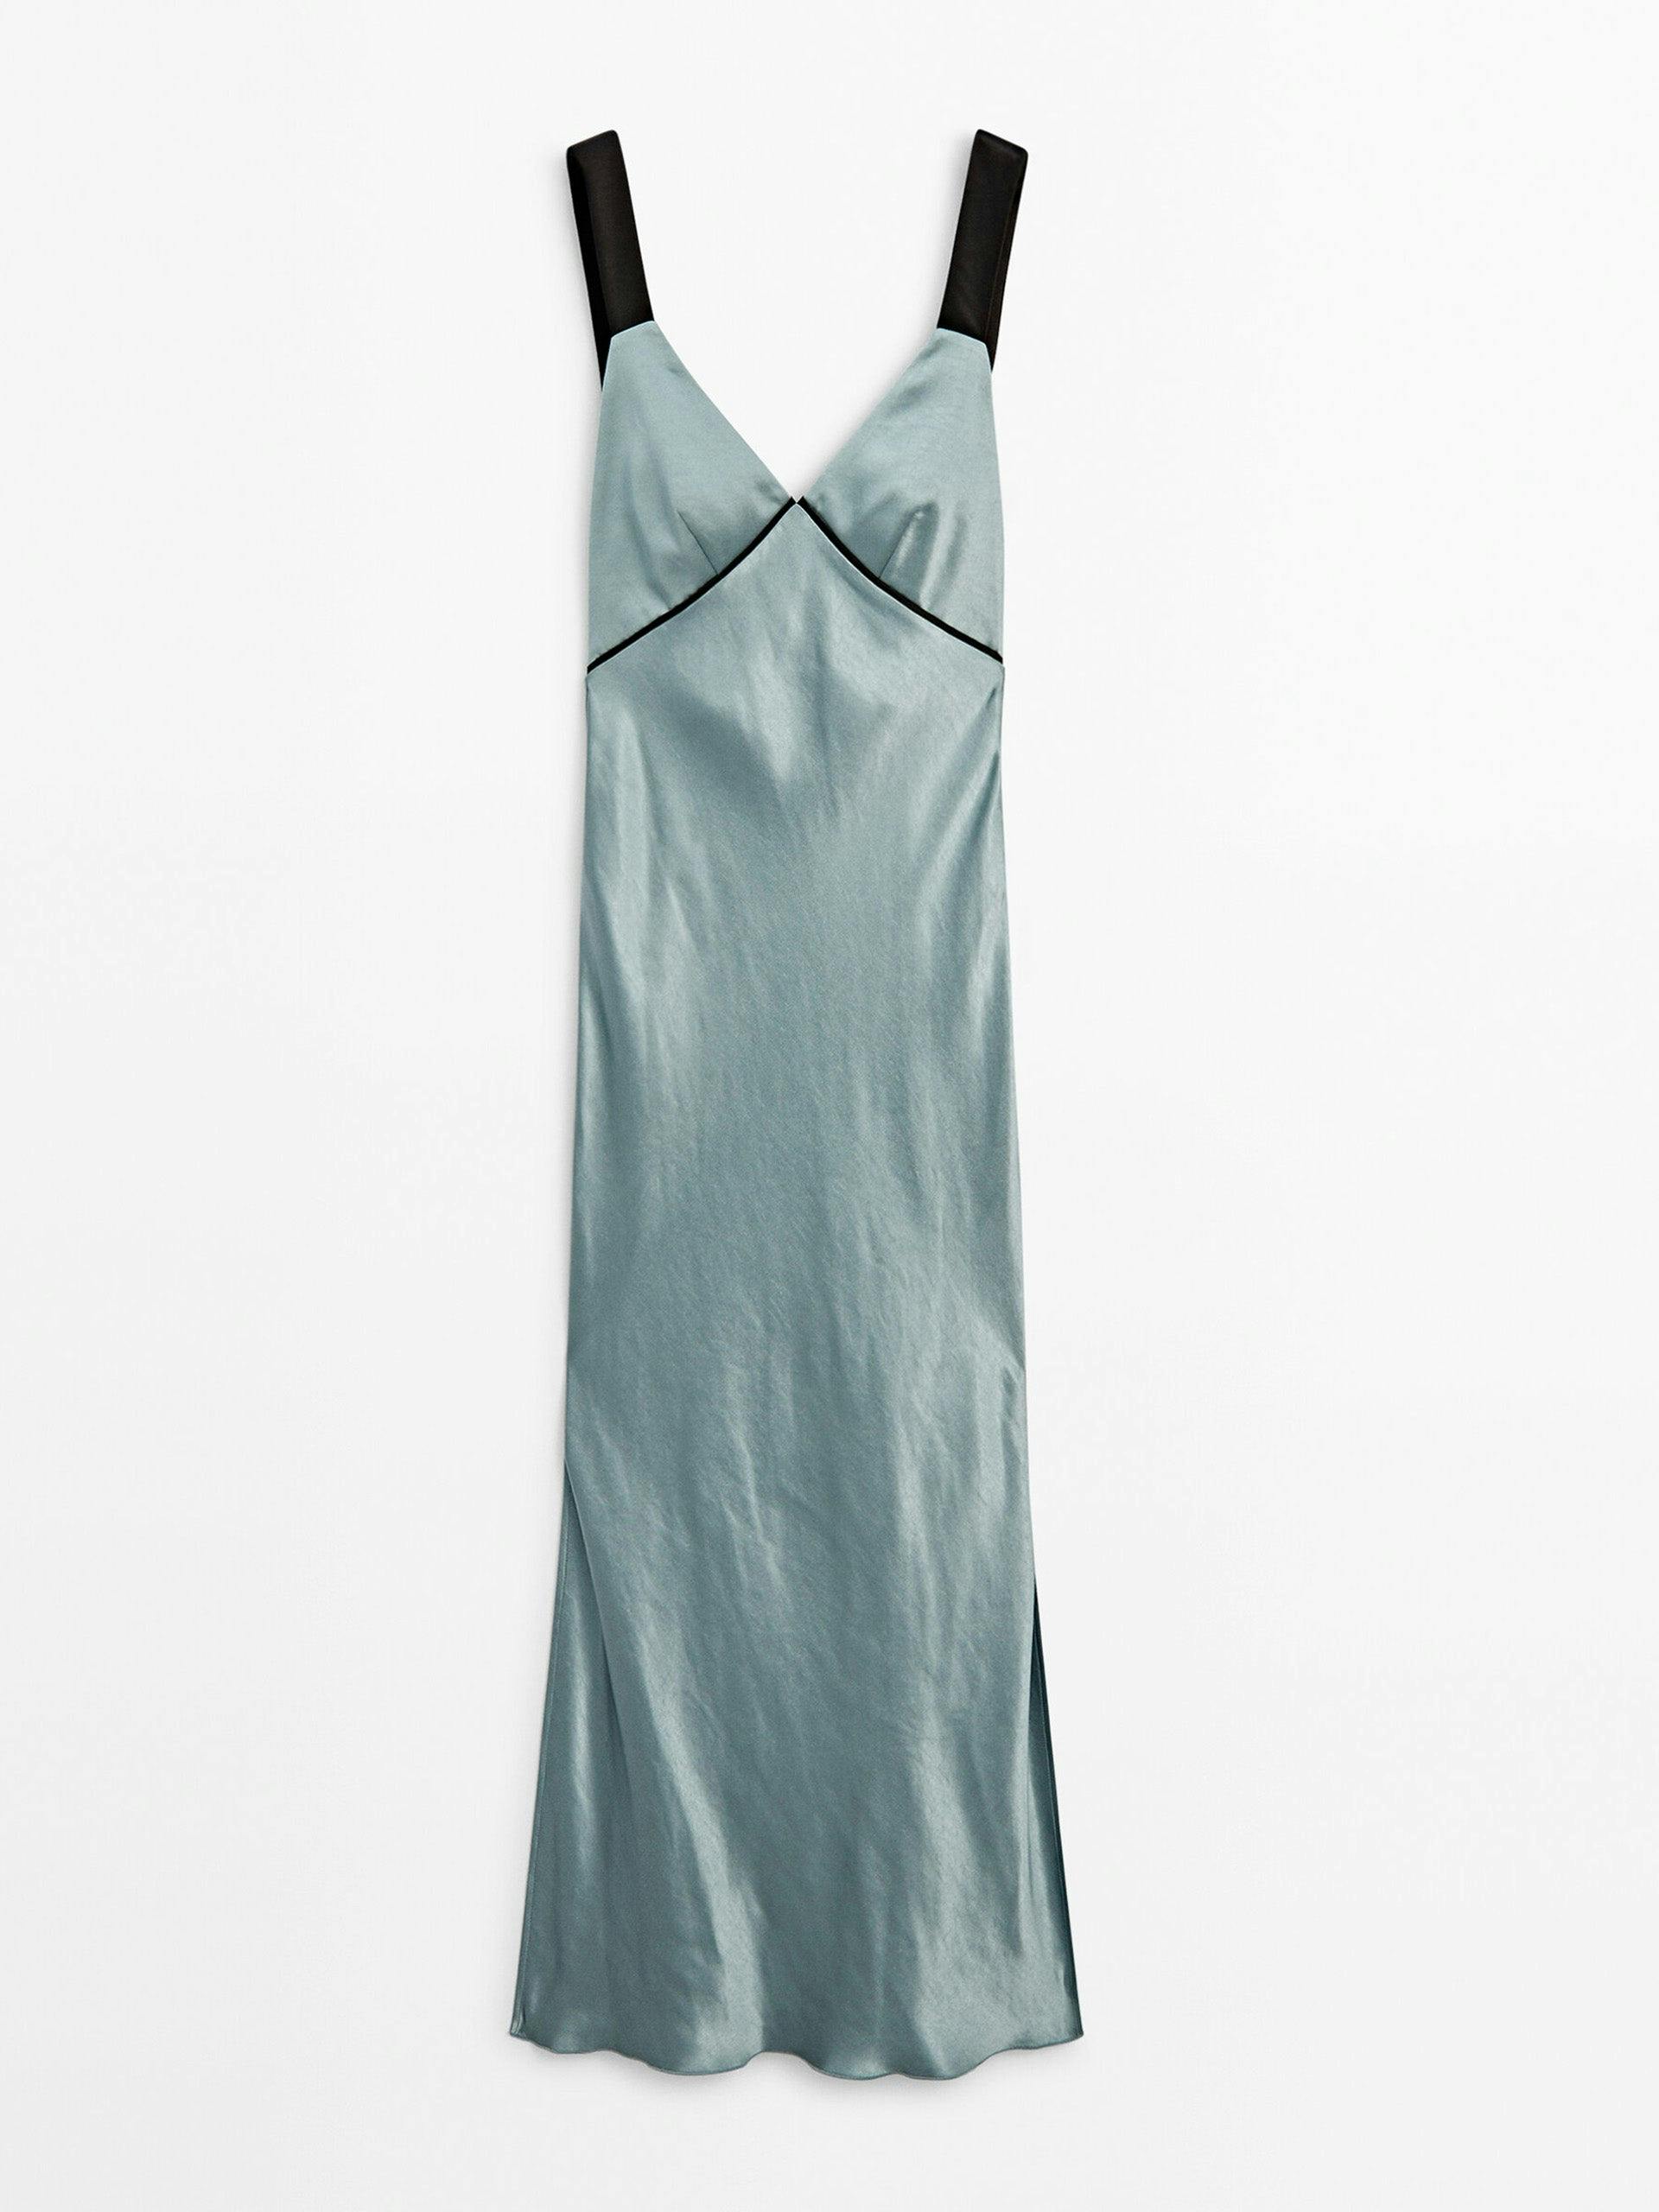 Satin dress with contrast details